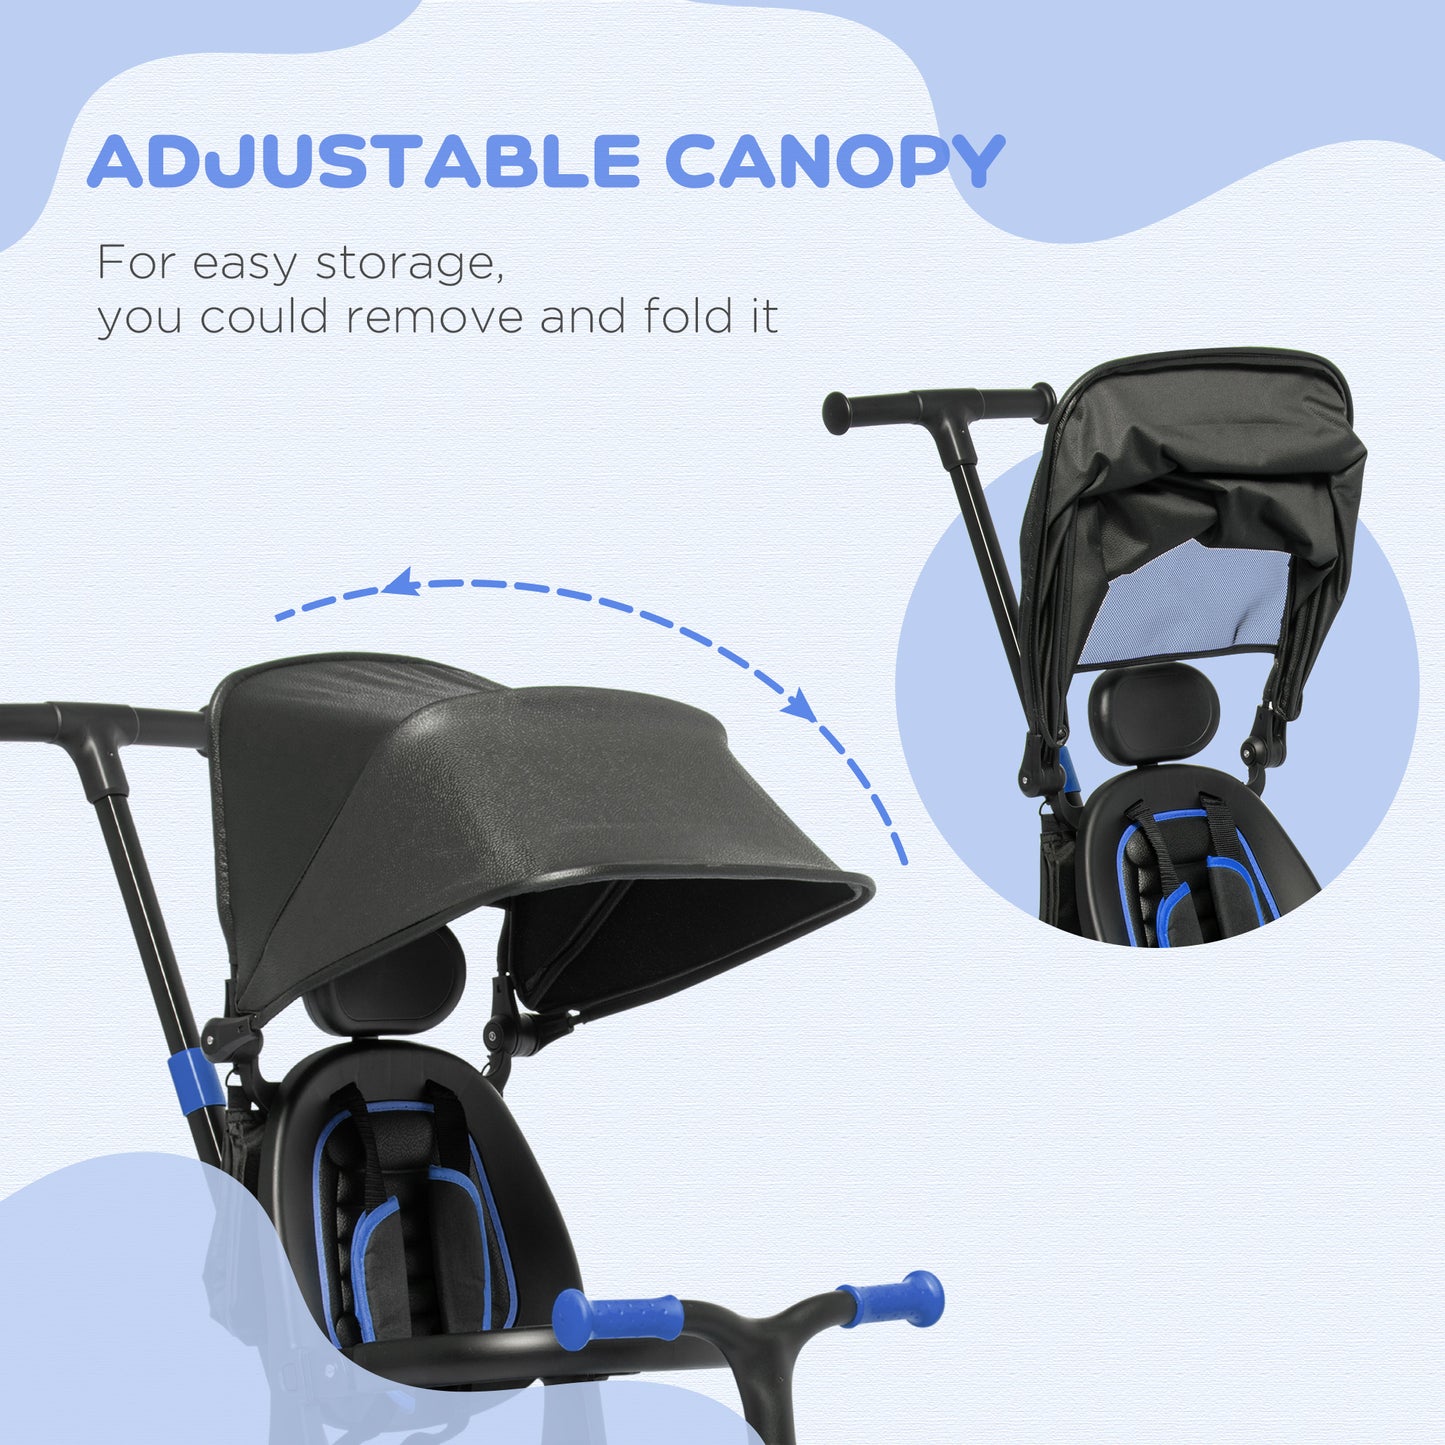 AIYAPLAY 3-in-1 Tricycle for Kids with Aluminium Frame, Baby Trike with Adjustable Push Handle, Canopy and Seat Angle for 18-48 Months, Blue